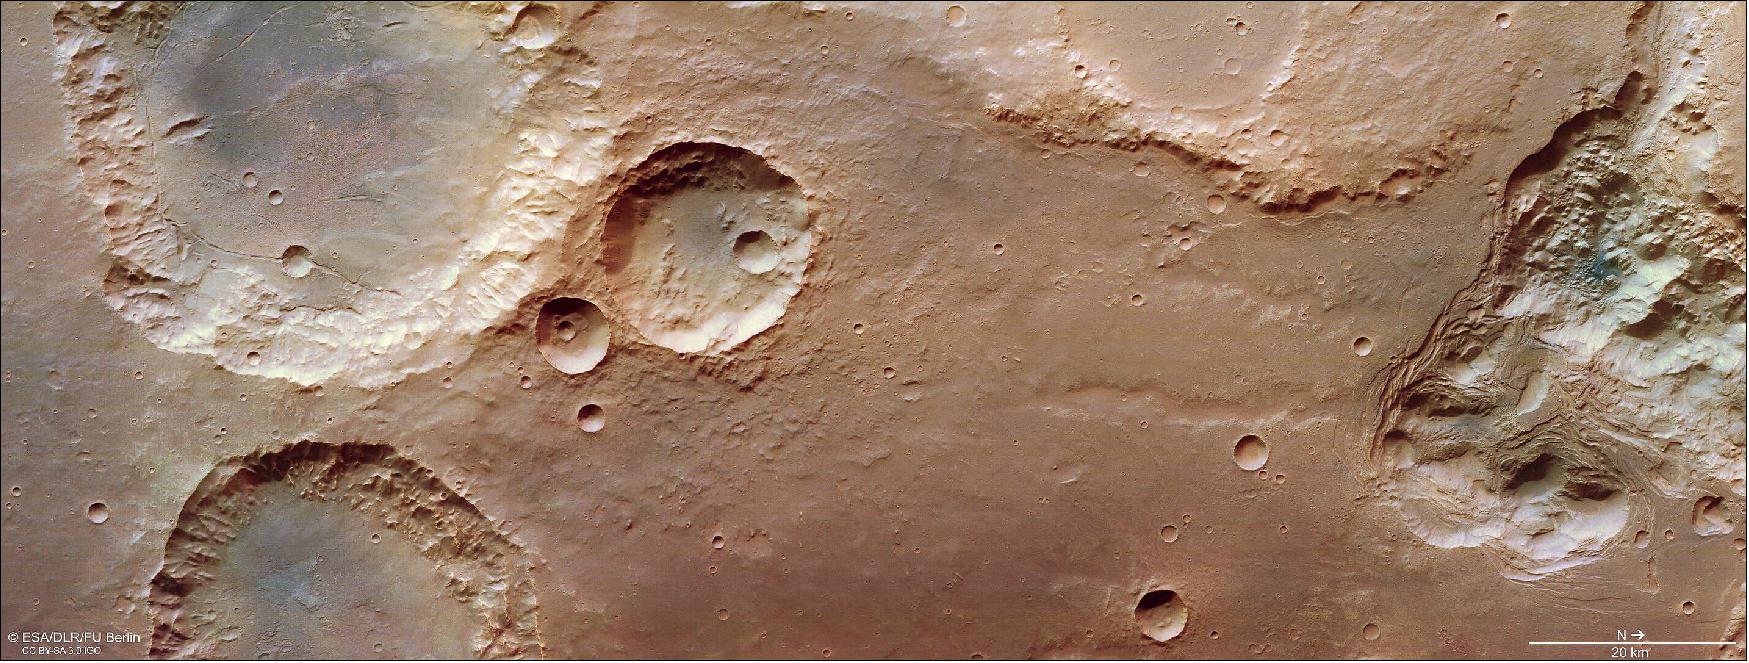 Figure 65: This image from ESA’s Mars Express shows craters, valleys and chaotic terrain in Mars’ Pyrrhae Regio. This image comprises data gathered by ESA’s Mars Express using its High Resolution Stereo Camera (HRSC) on 3 August 2020 (orbit 20972). The ground resolution is approximately 16 m/pixel and the images are centered at about 322°E/16°S. This image was created using data from the nadir and color channels of the HRSC. The nadir channel is aligned perpendicular to the surface of Mars, as if looking straight down at the surface. North is to the right (image credit: ESA/DLR/FU Berlin, CC BY-SA 3.0 IGO)